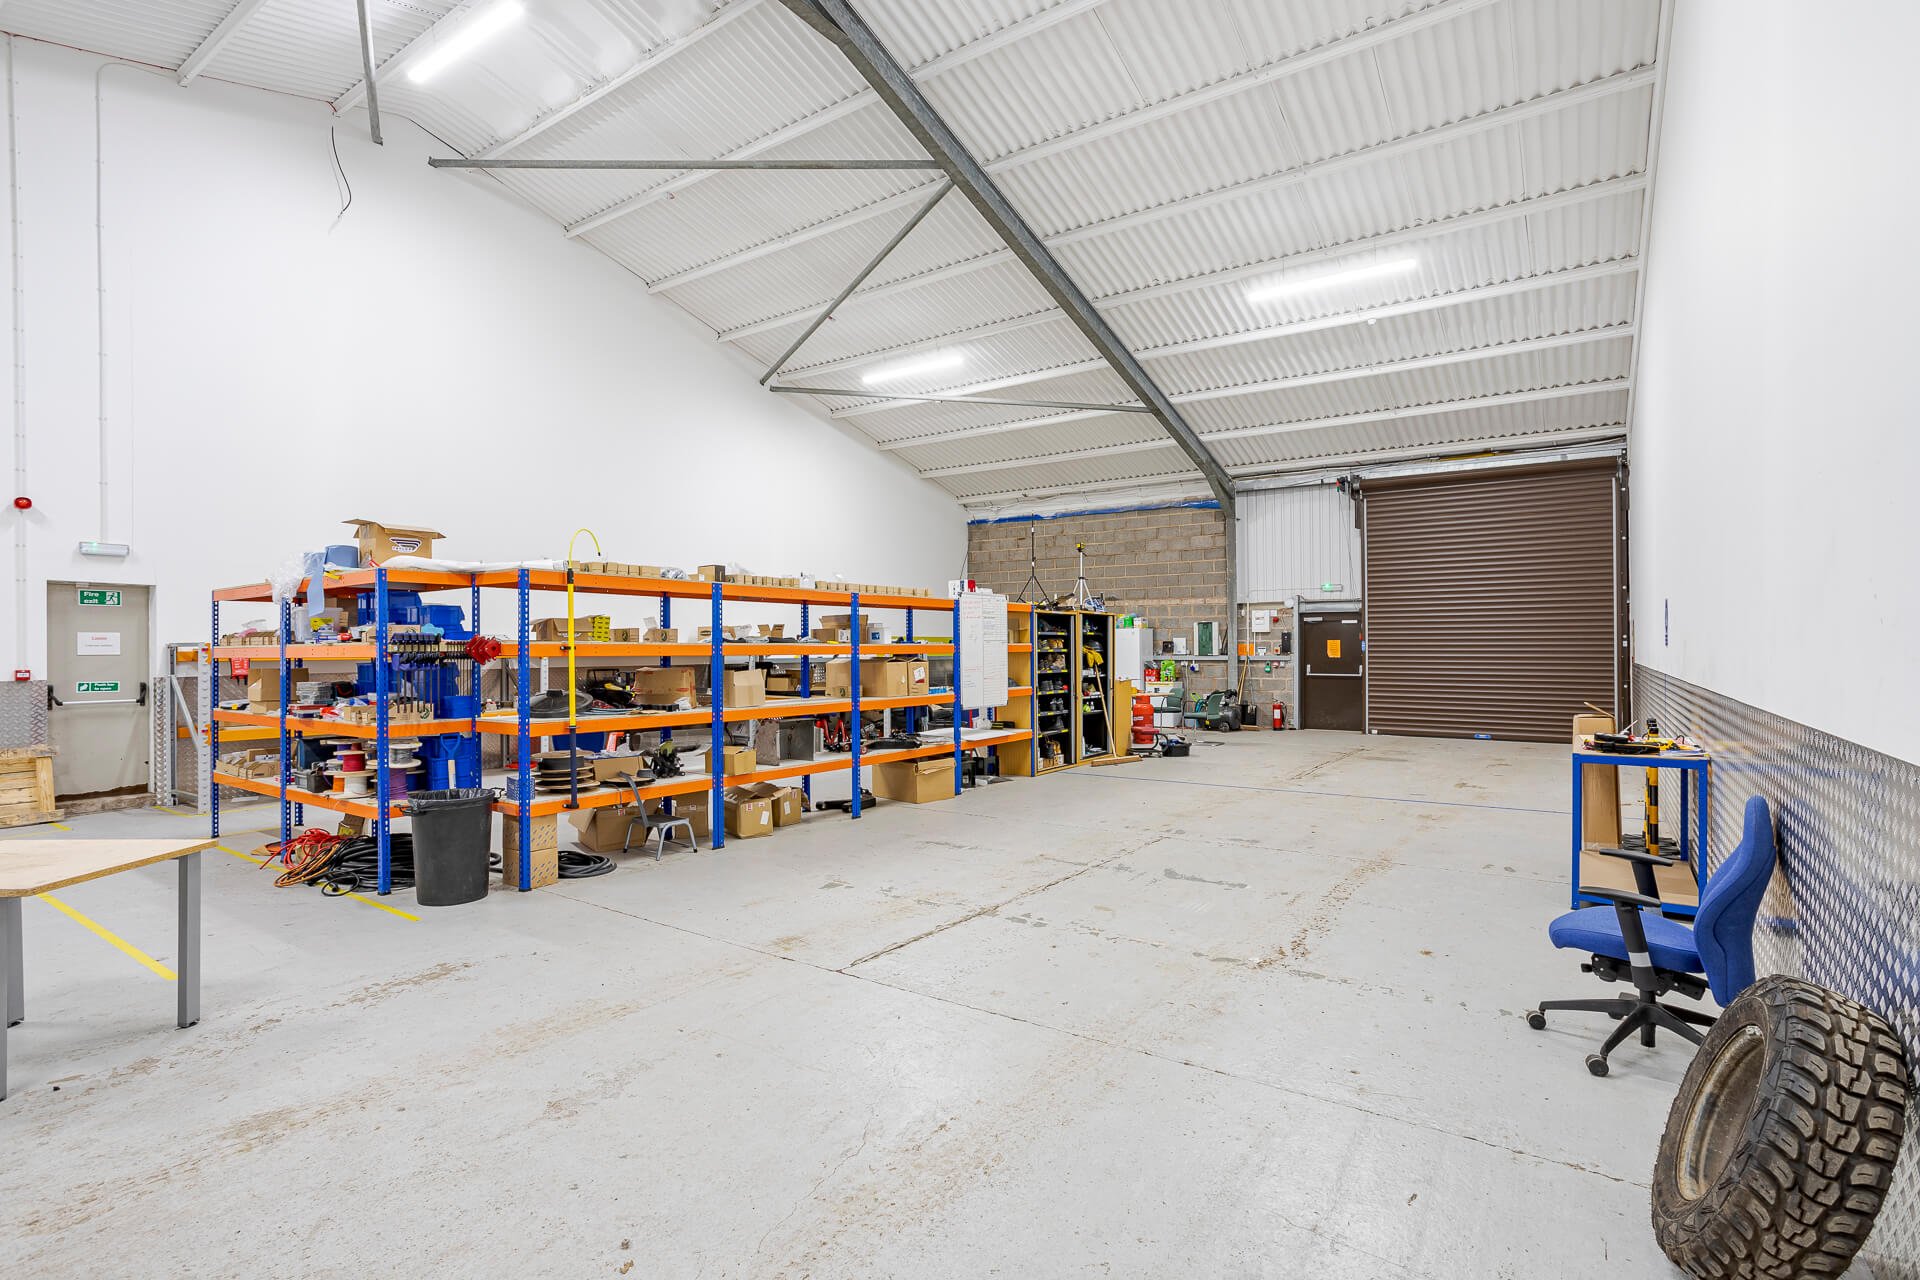 Warehouse Storage with Shelves and Racks